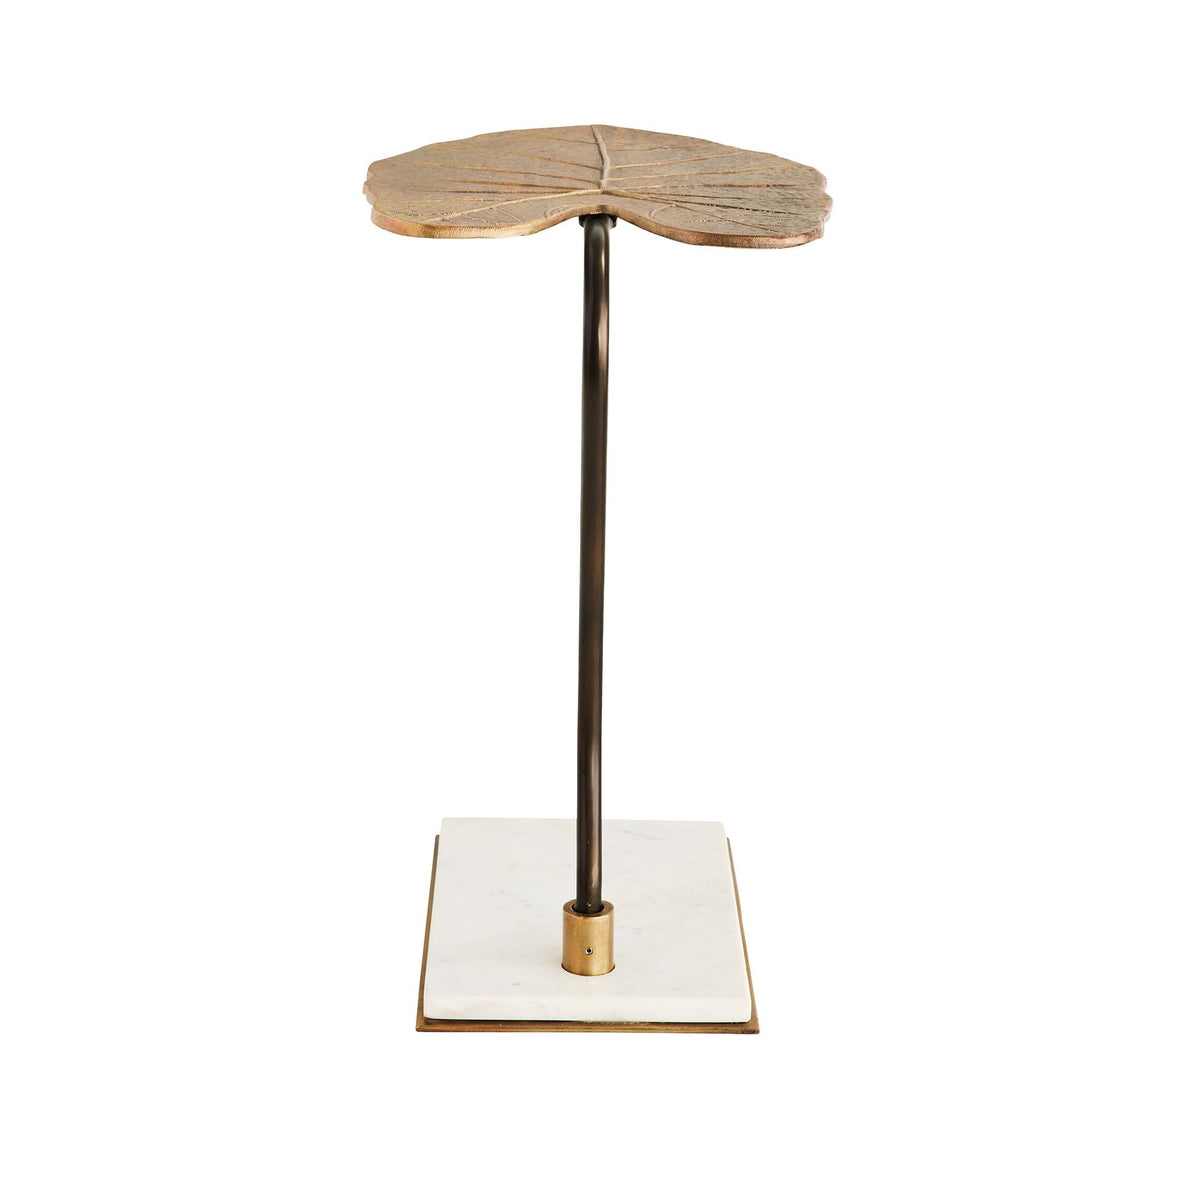 Kileen Antique Brass Accent Table